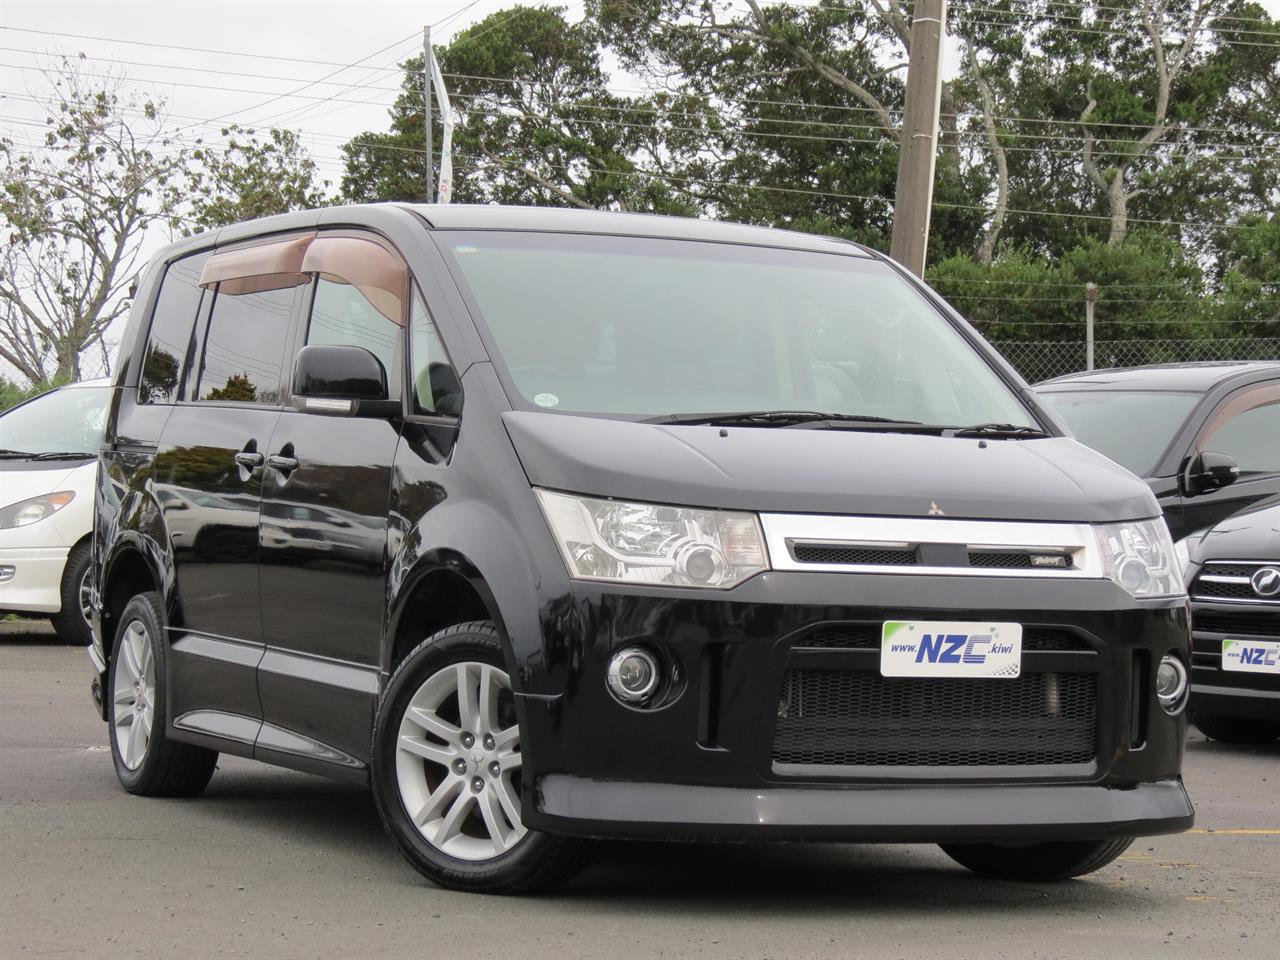 NZC 2007 Mitsubishi Delica just arrived to Auckland